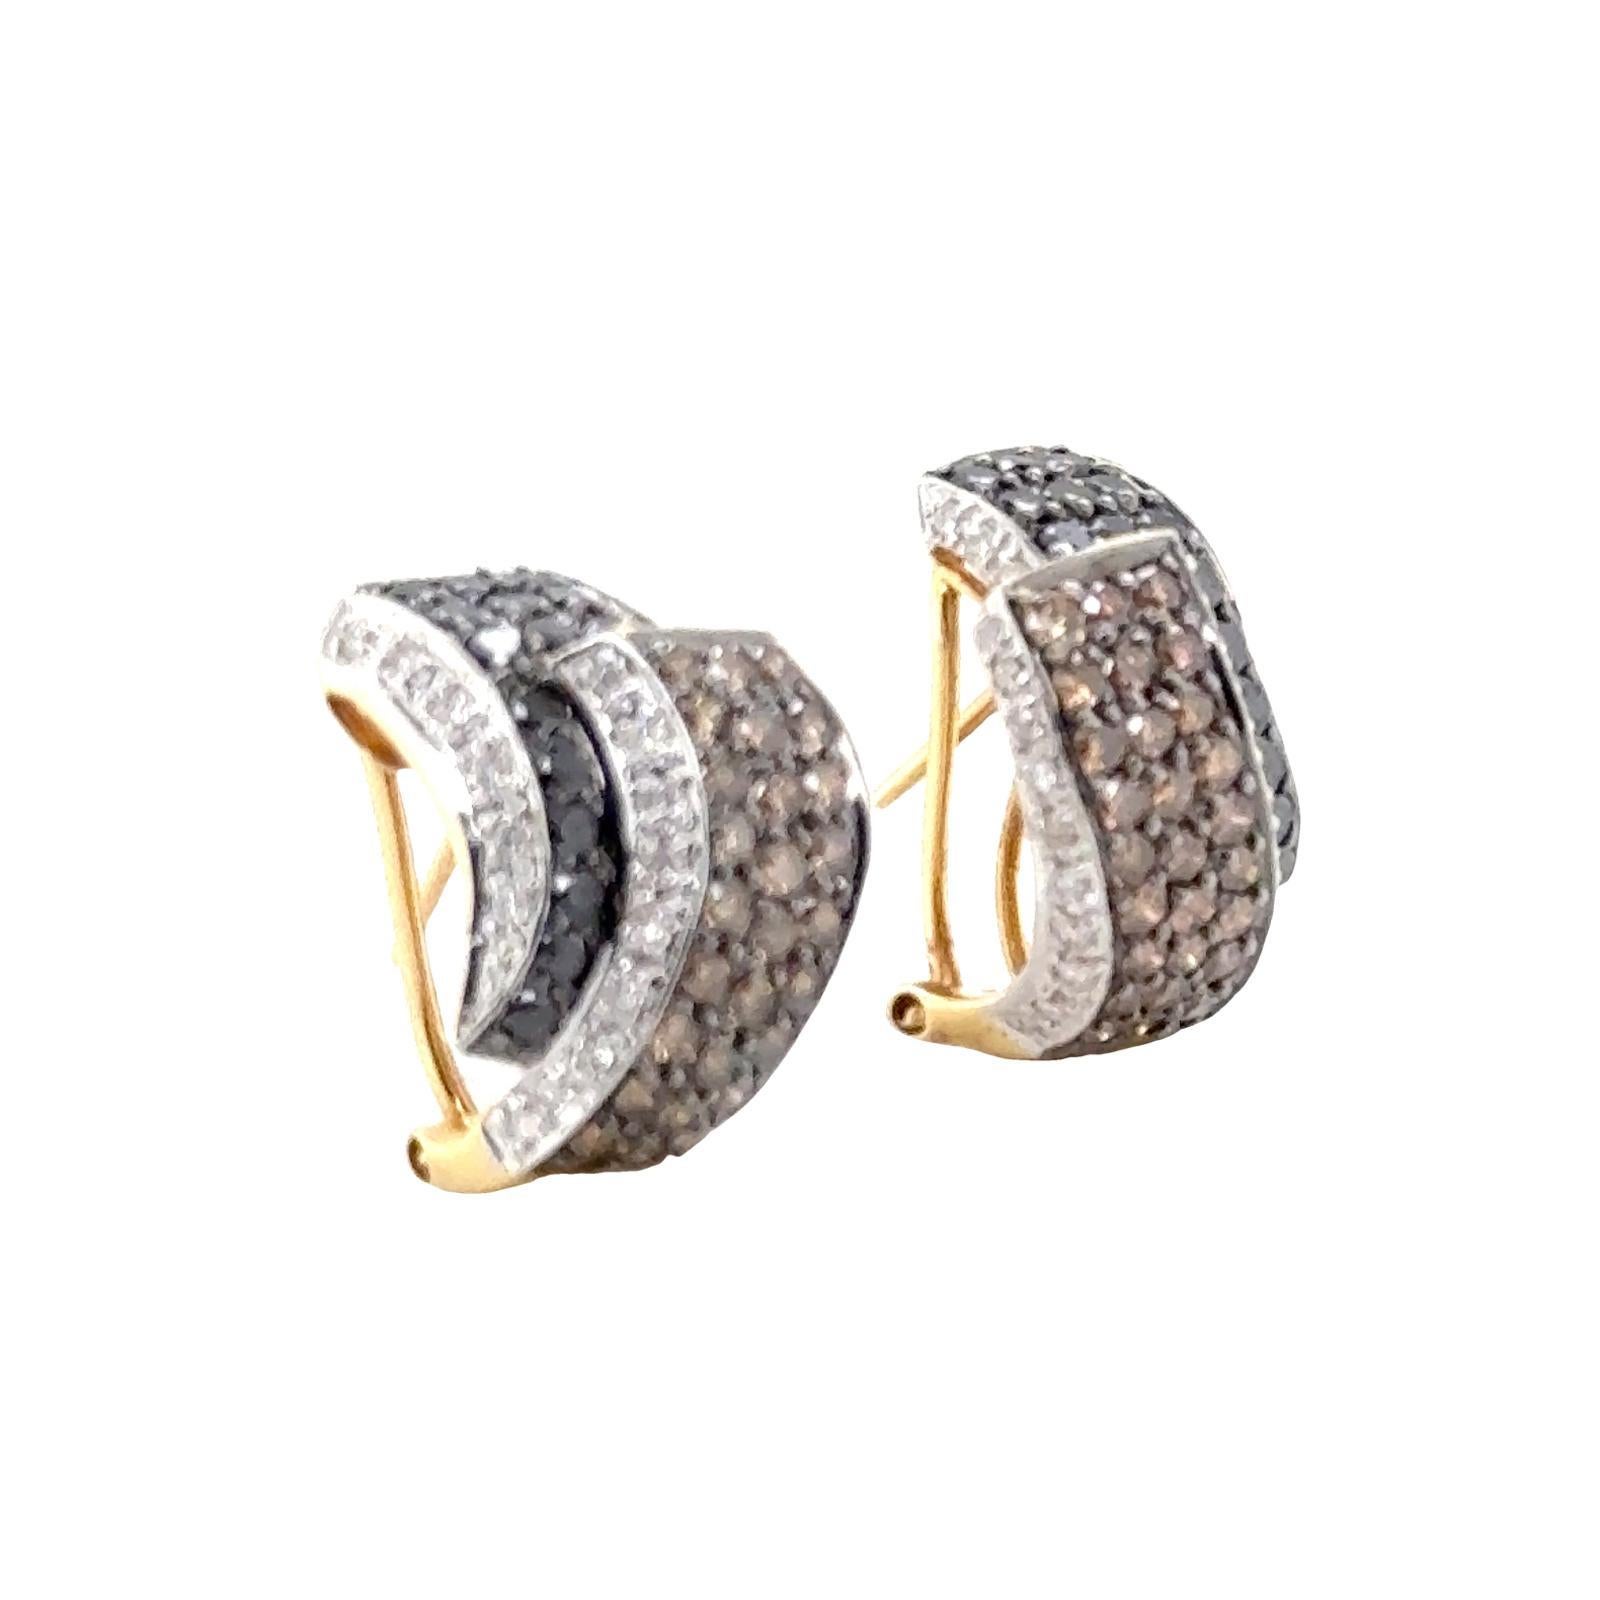 White Champagne & Black Diamond 14 Karat Yellow Gold Ribbon Leverback Earrings In Excellent Condition For Sale In Boca Raton, FL